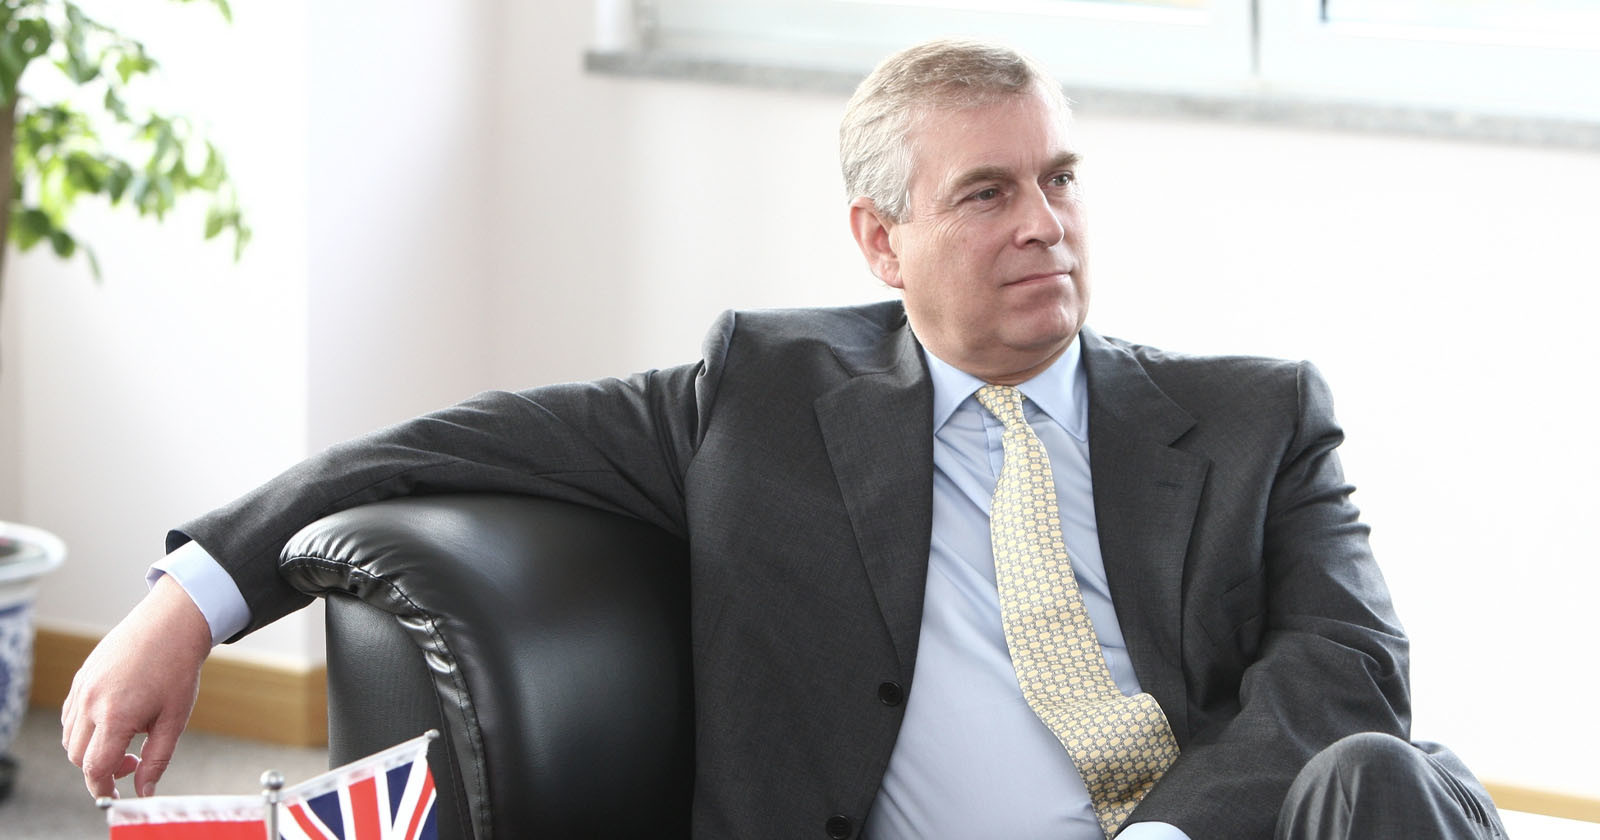 Photographer Claims to Have Embarrassing Photo of Prince Andrew